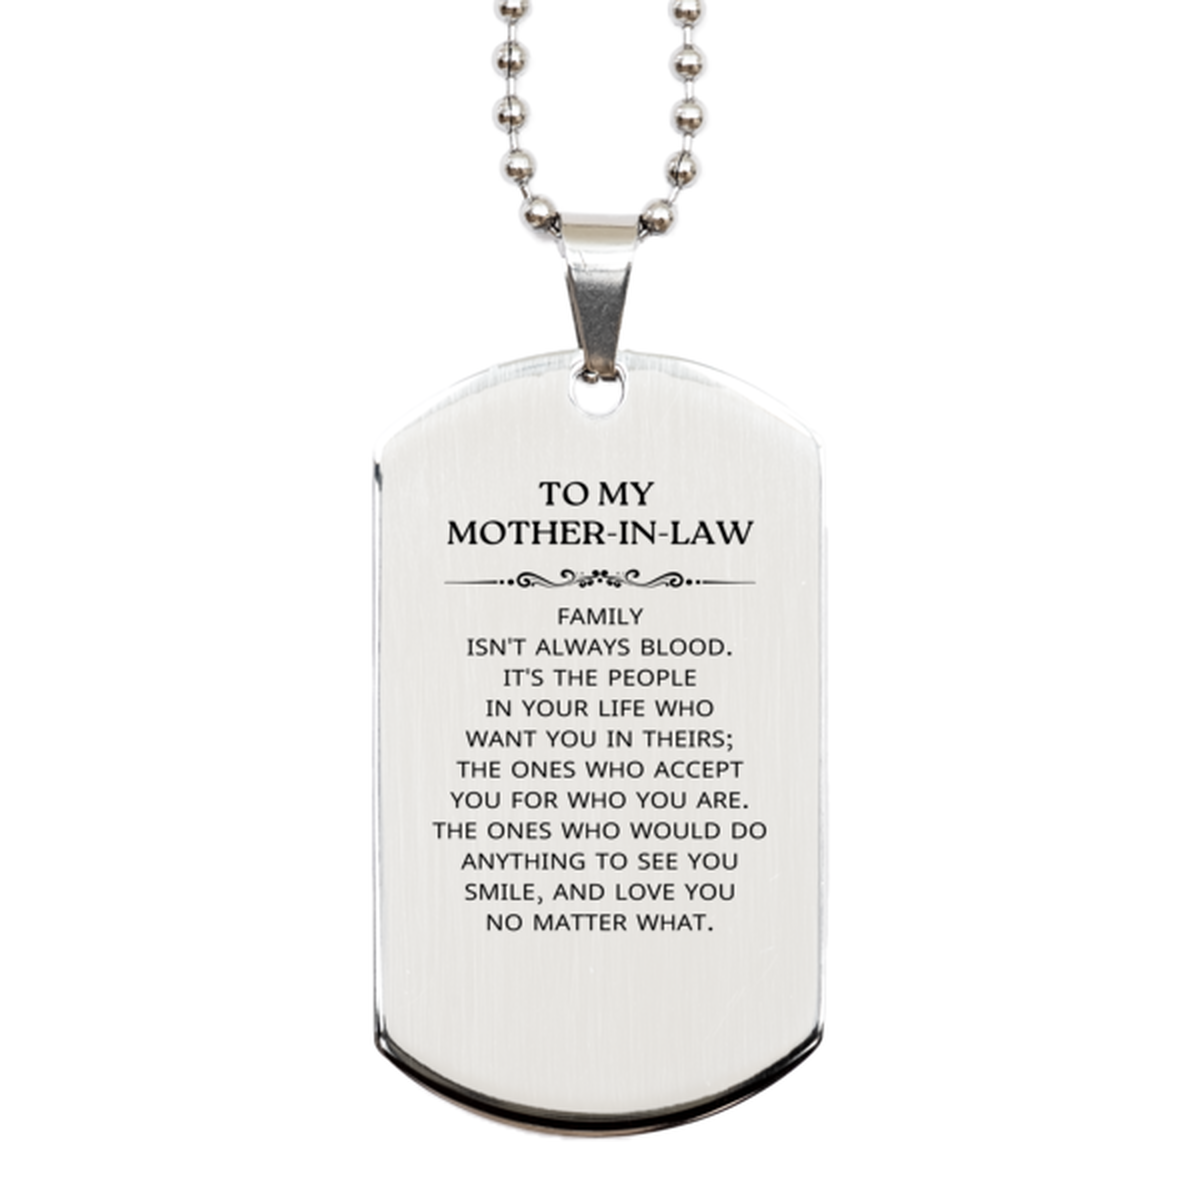 To My Mother-In-Law Gifts, Family isn't always blood, Mother-In-Law Silver Dog Tag, Birthday Christmas Unique Present For Mother-In-Law